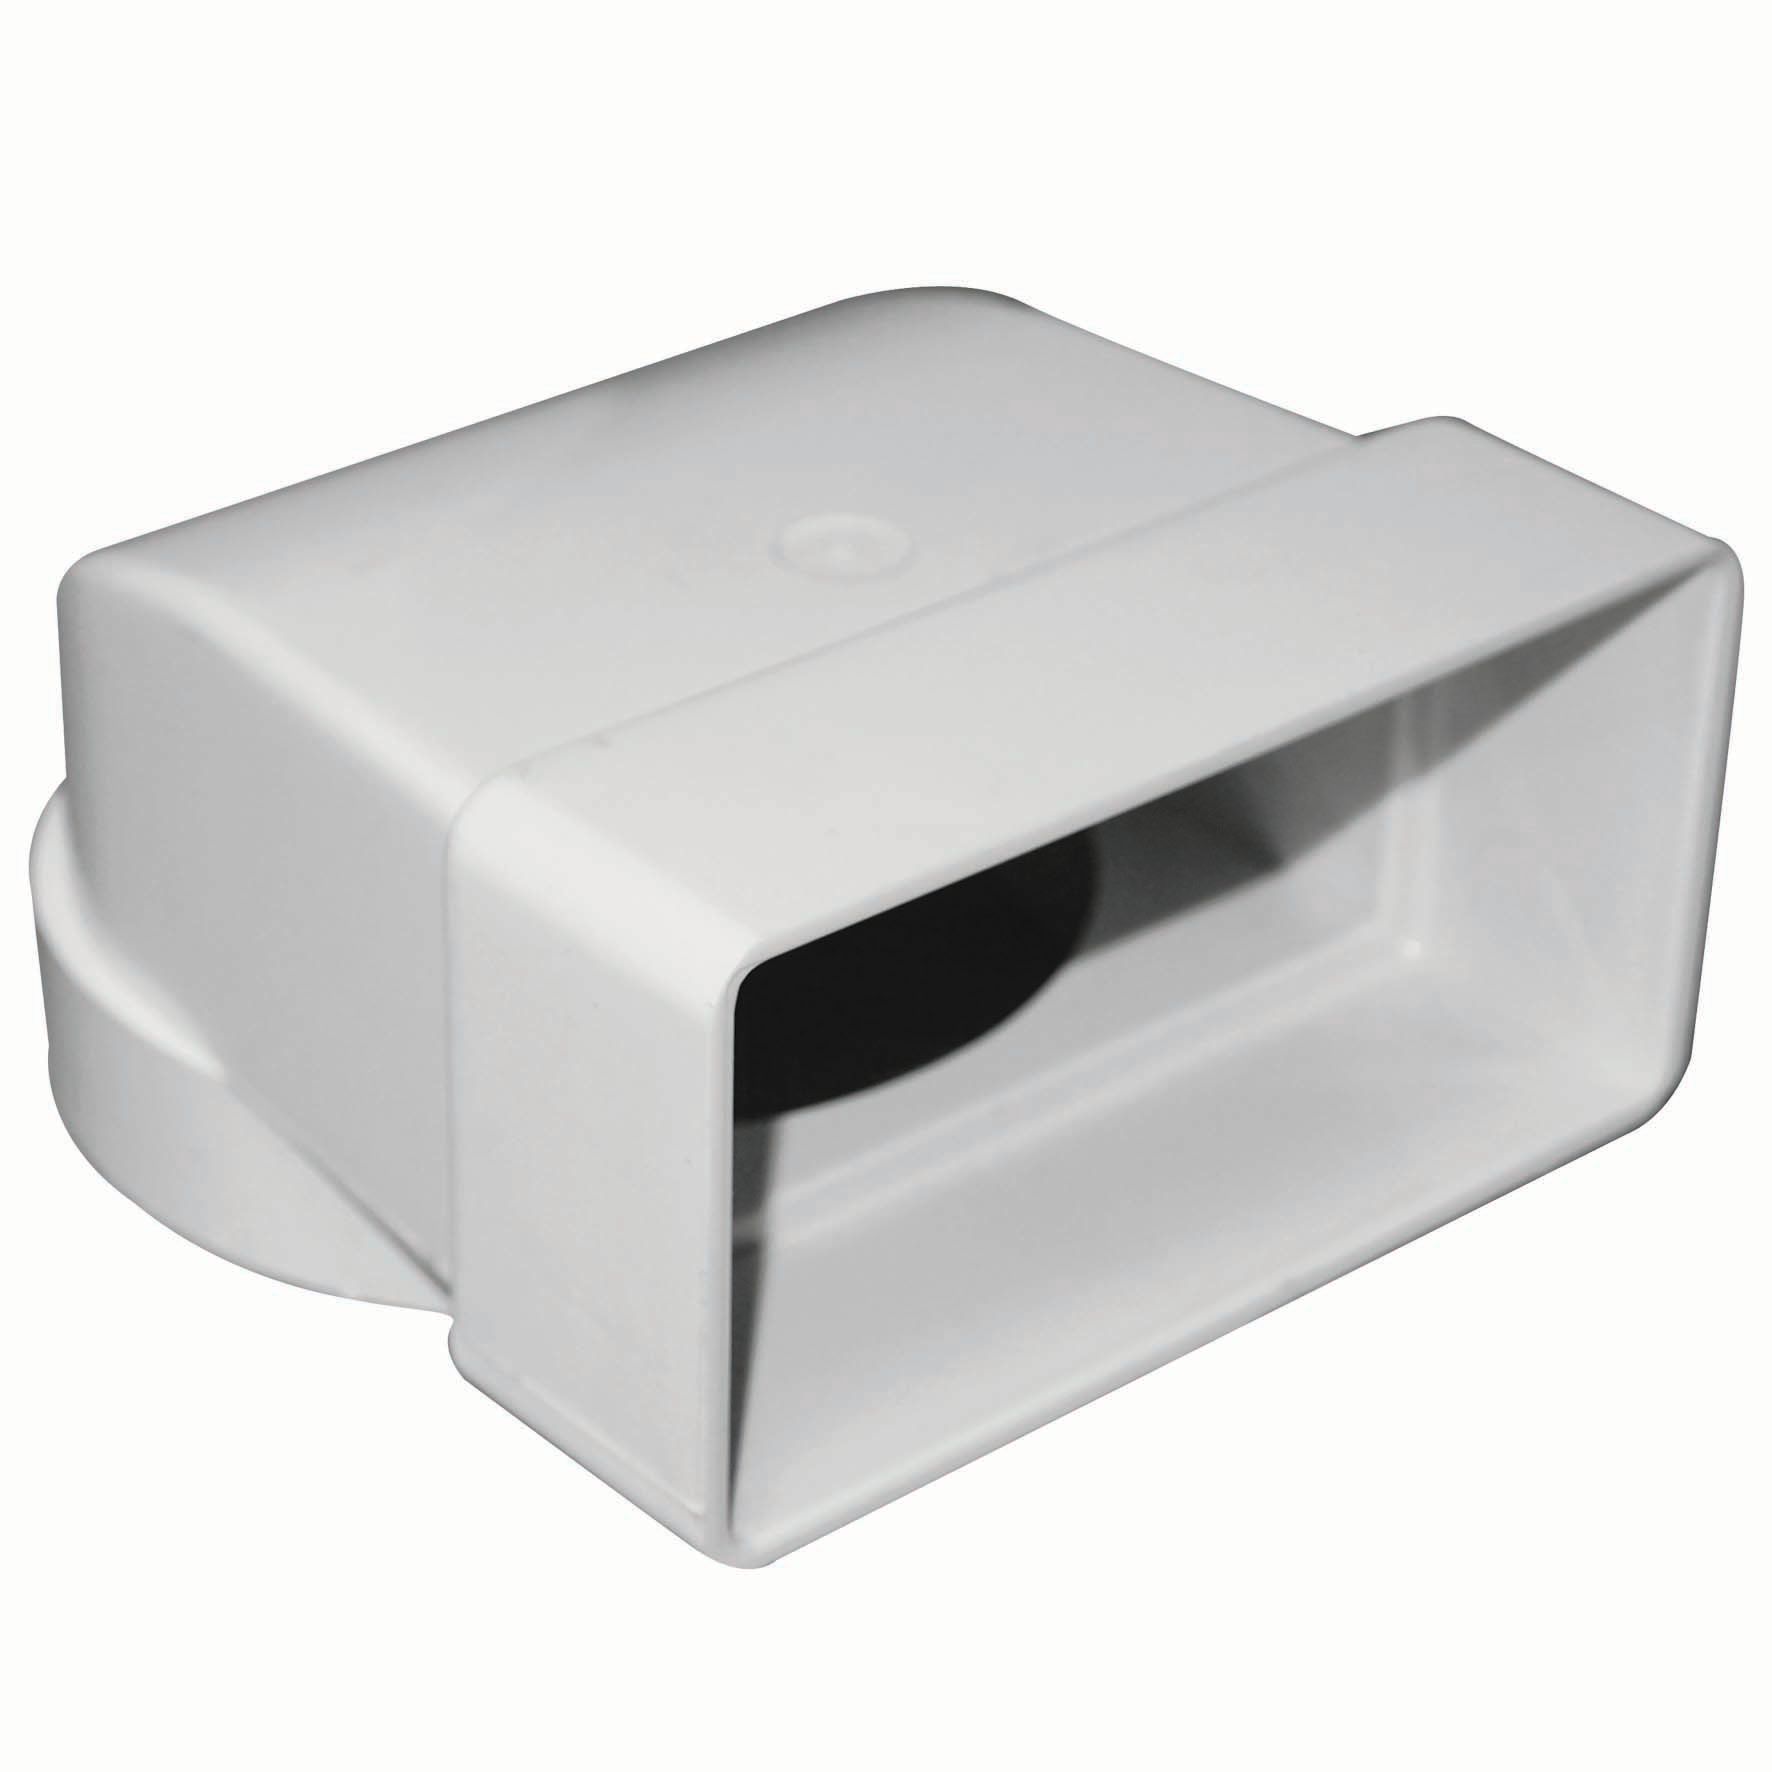 Image of Manrose PVC White Elbow Connector 90 Degree - 110 x 54mm